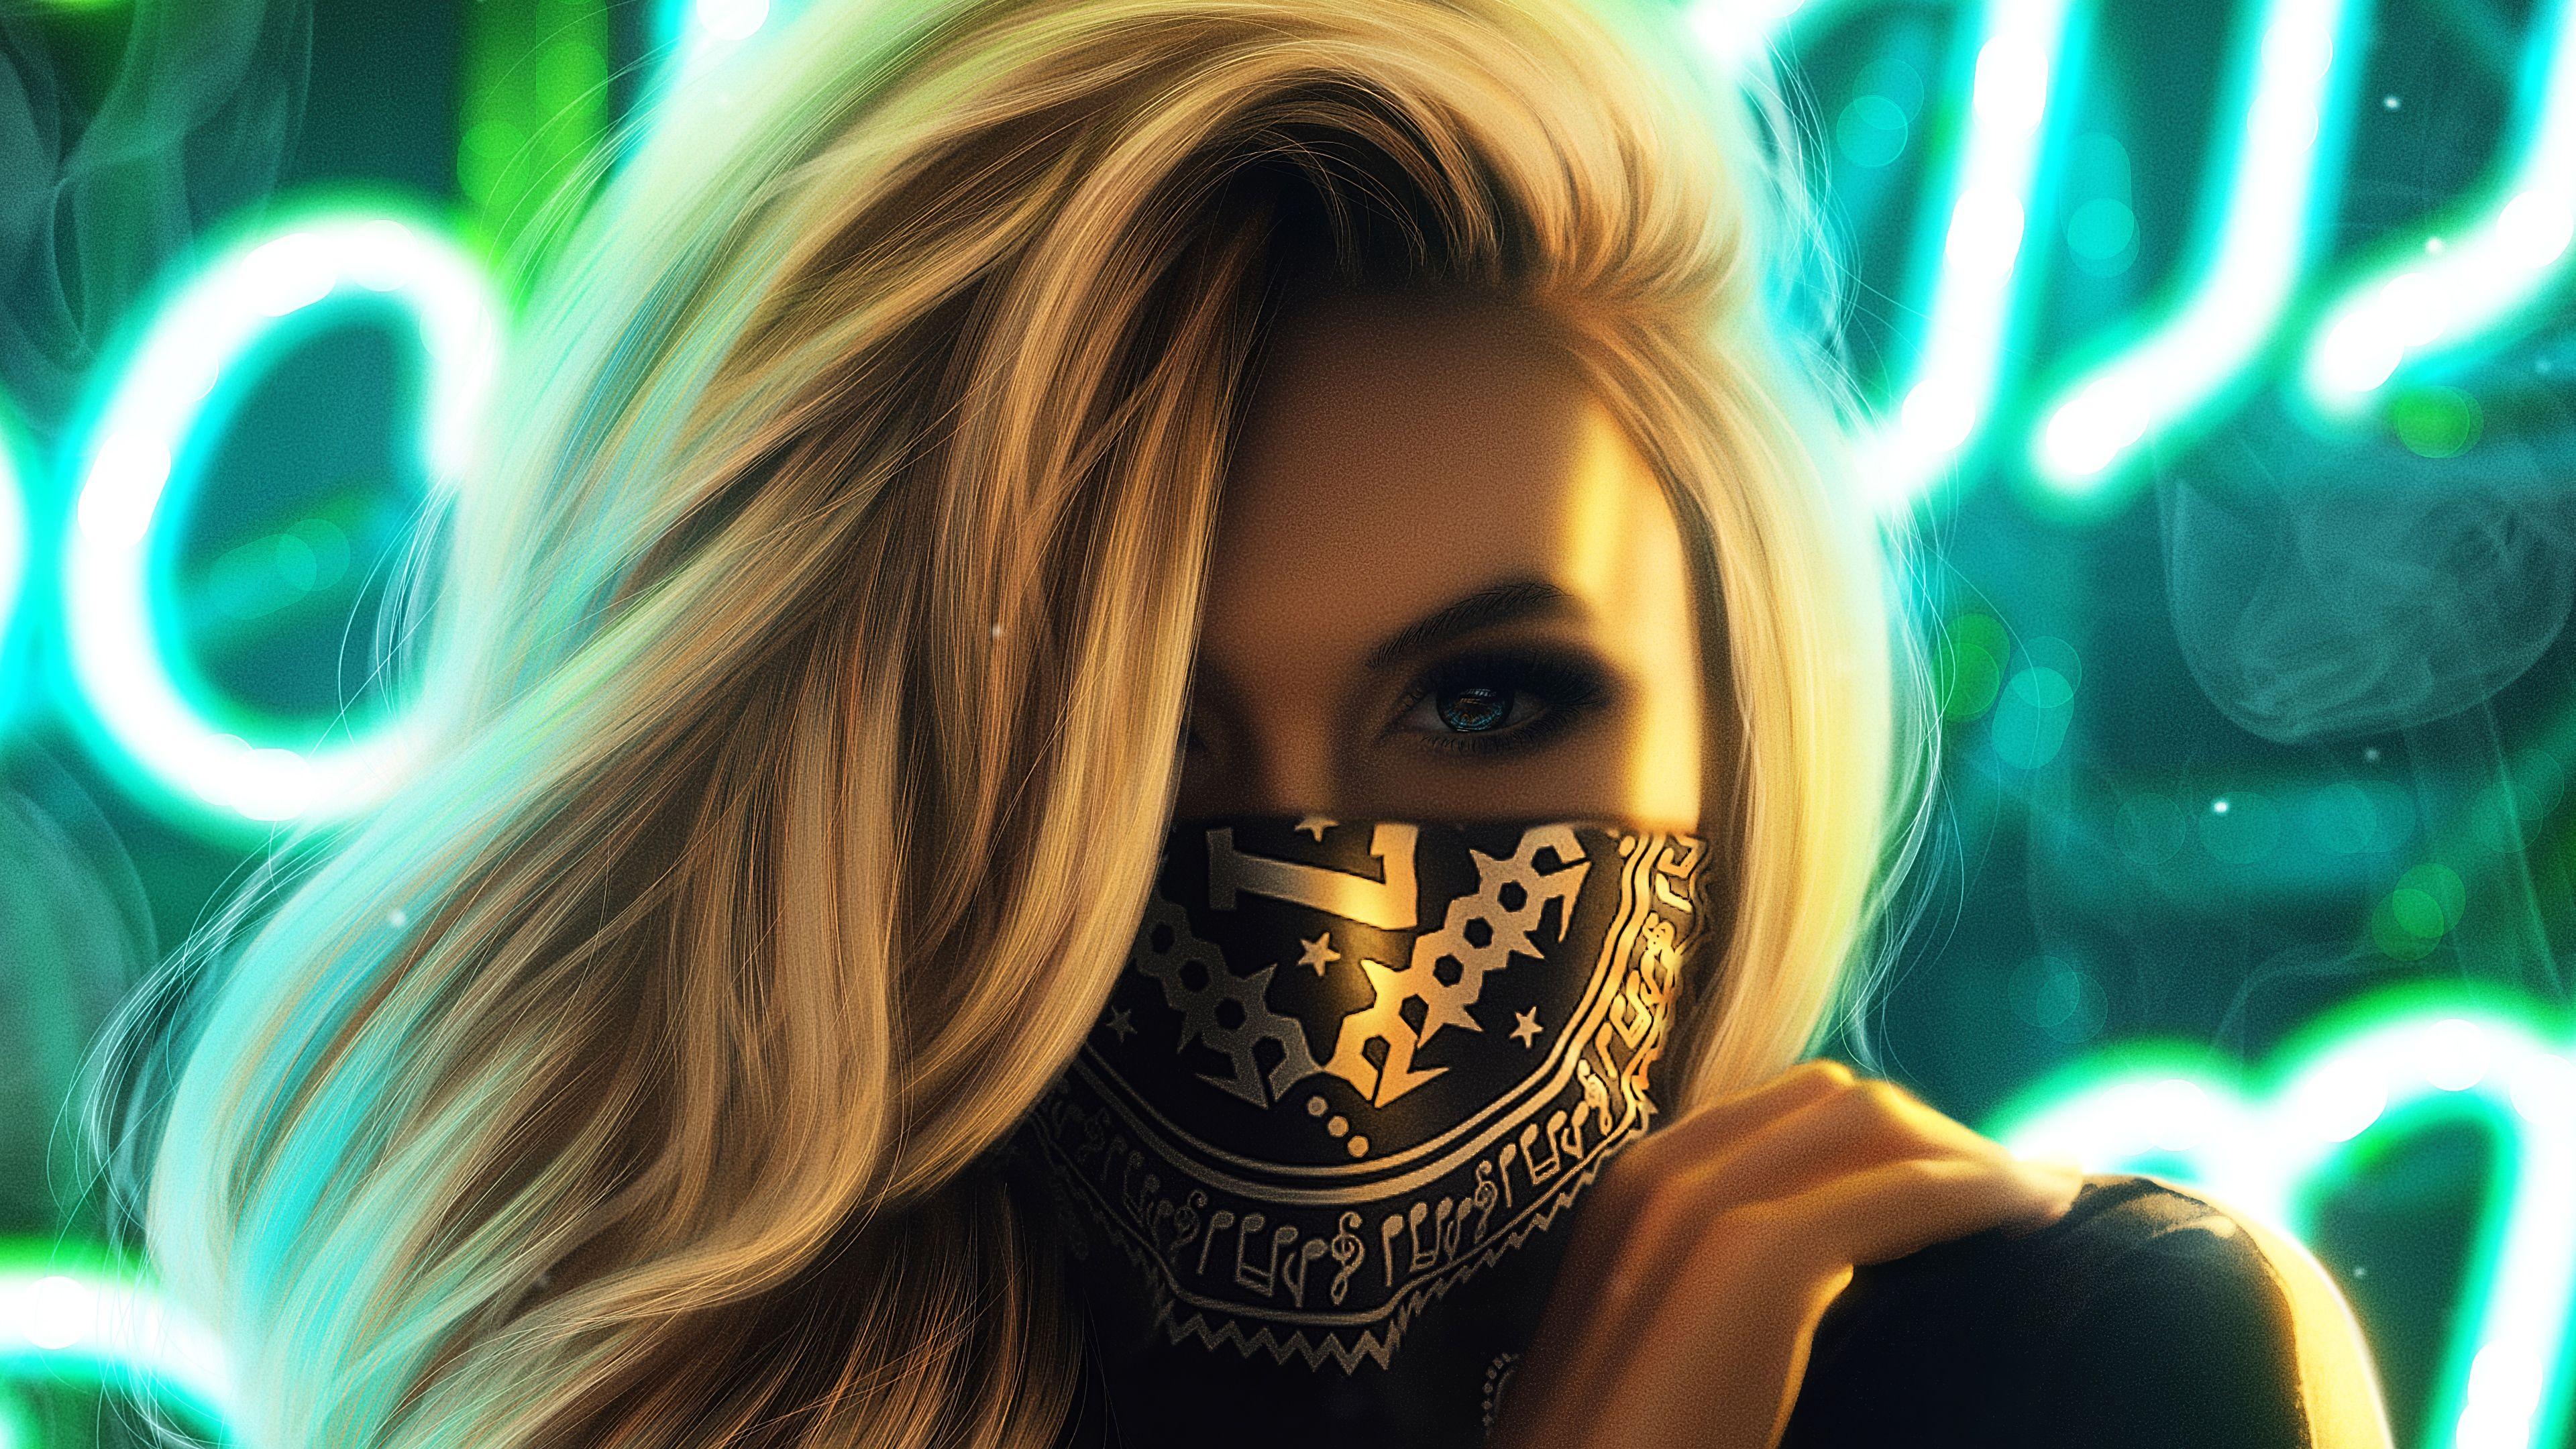 3840 x 2160 · jpeg - Girls With Mask Wallpapers - Wallpaper Cave